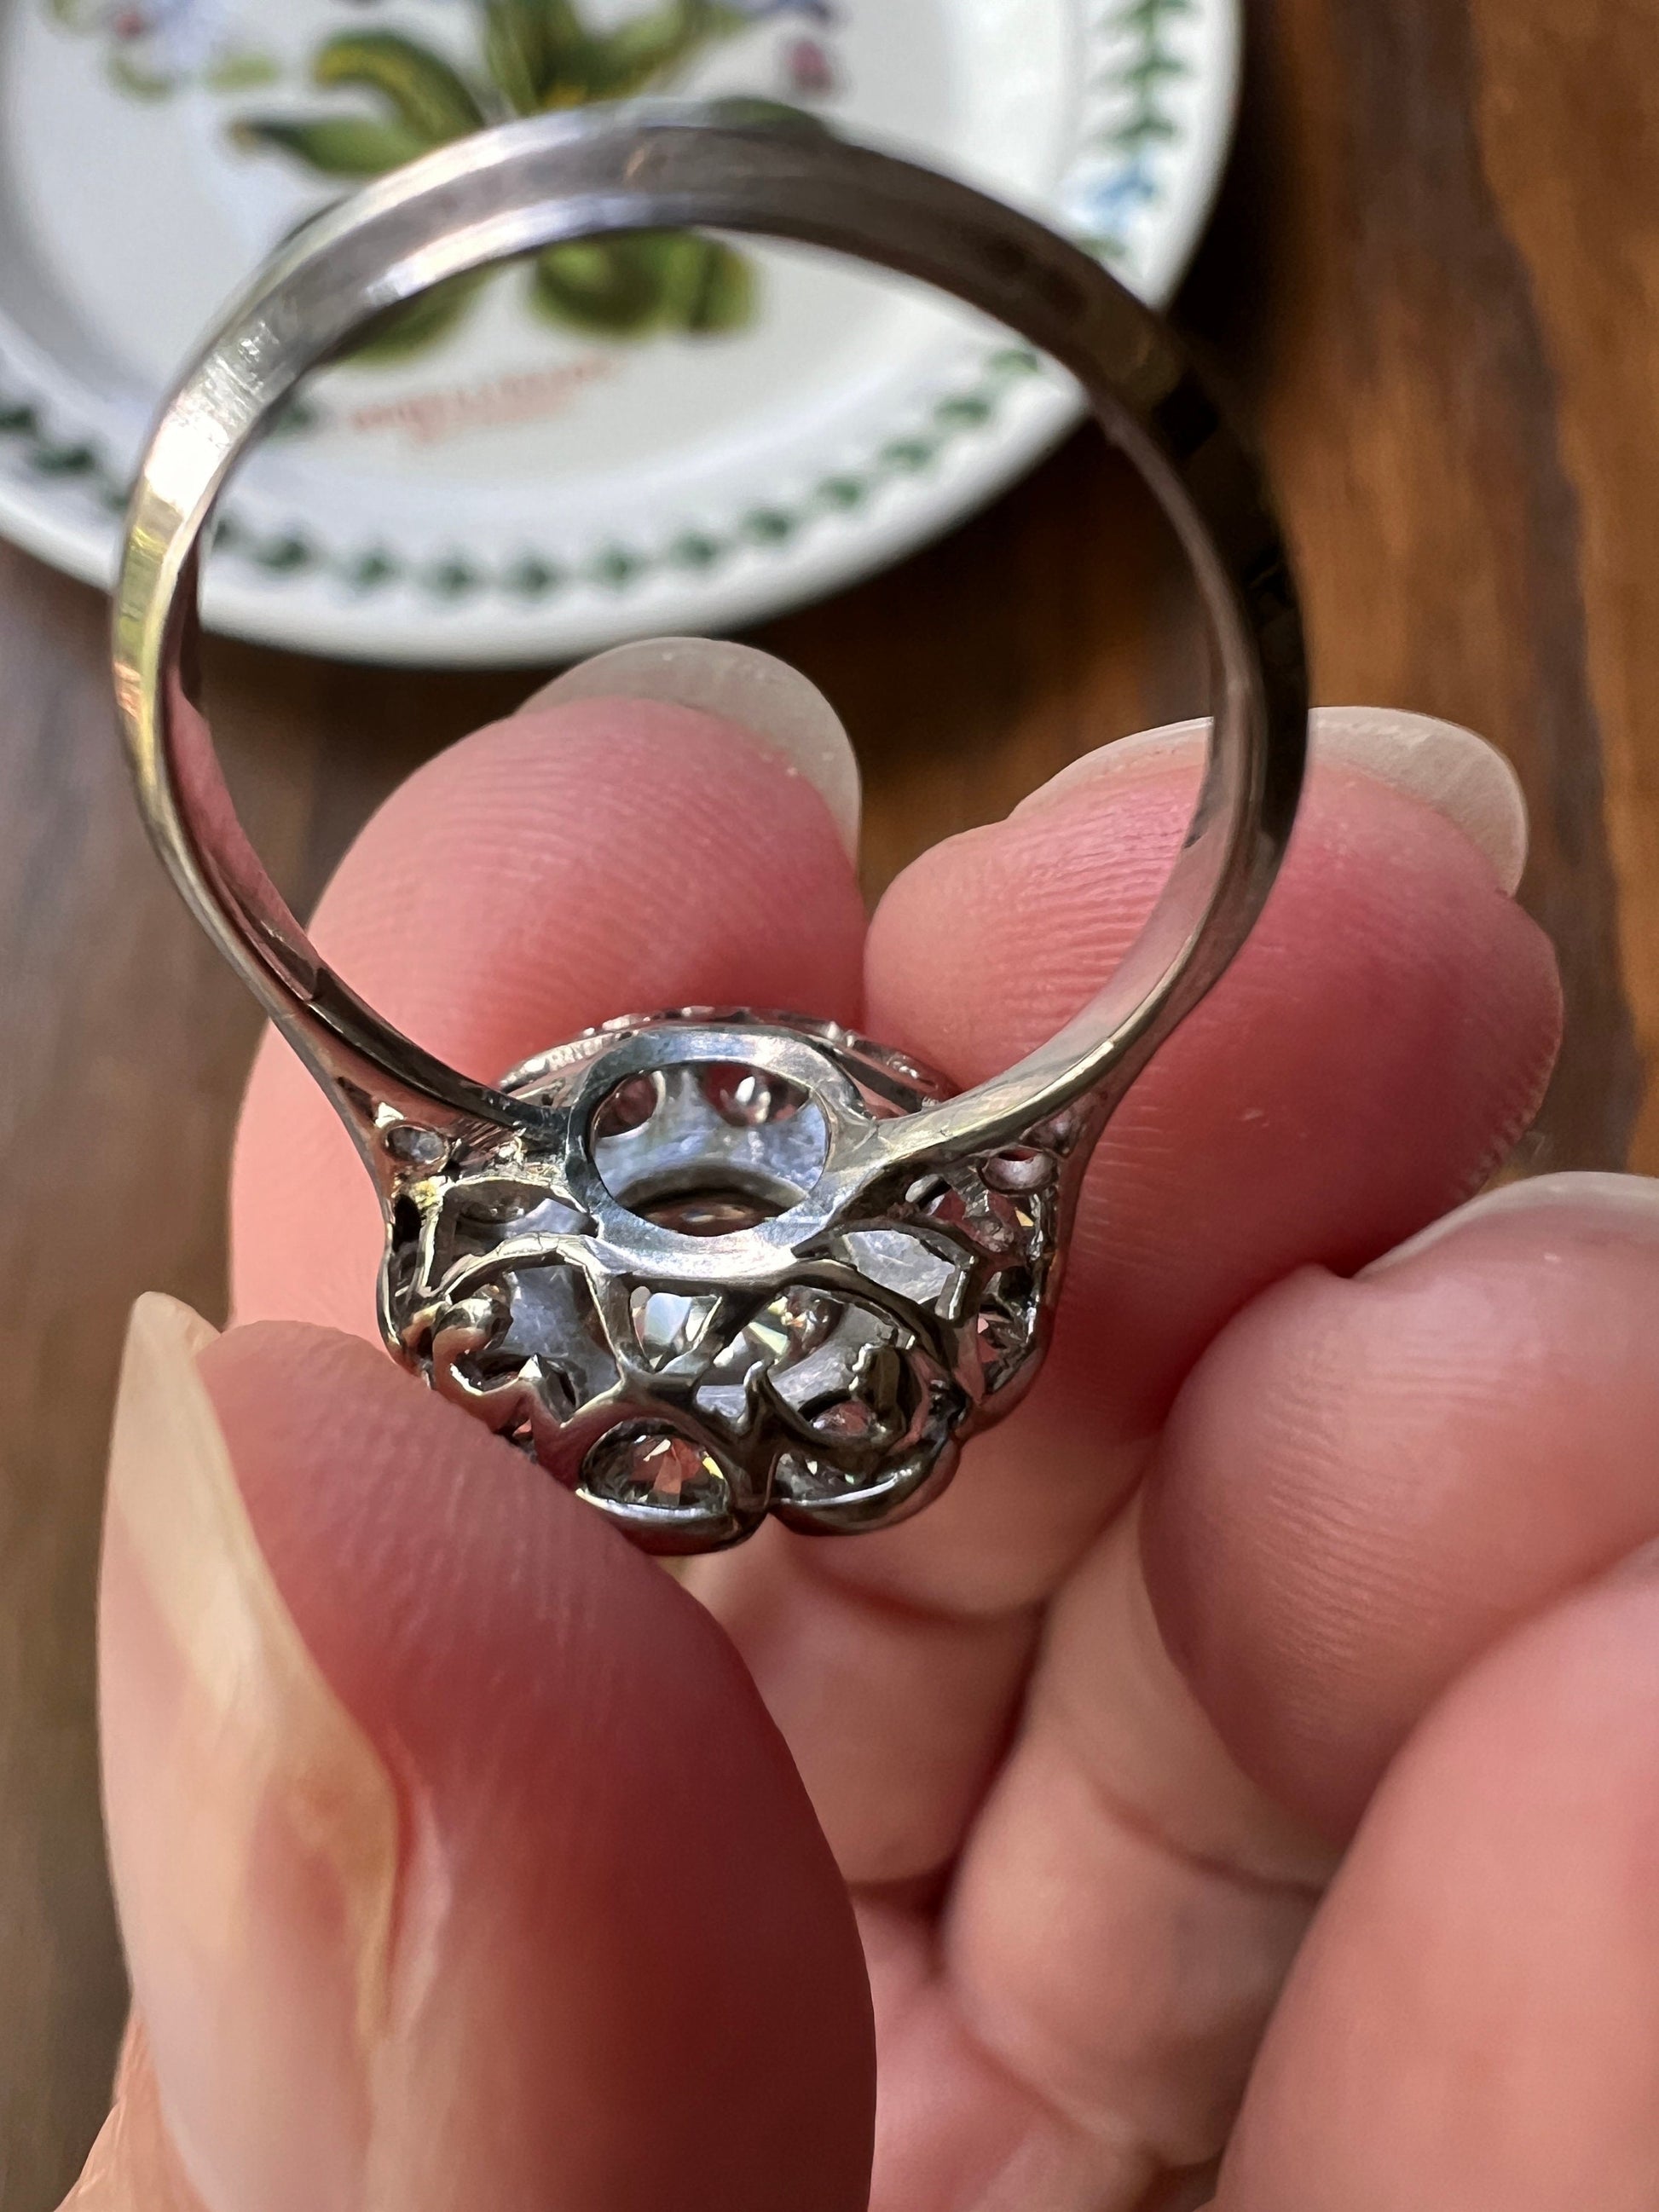 Antique Daisy CLUSTER Ring 1.3 CARAT Old Mine Cut DIAMOND 18k White Gold Floral Scallop Stacker Art Deco Romantic Gift OmC Engagement 1.3Ctw